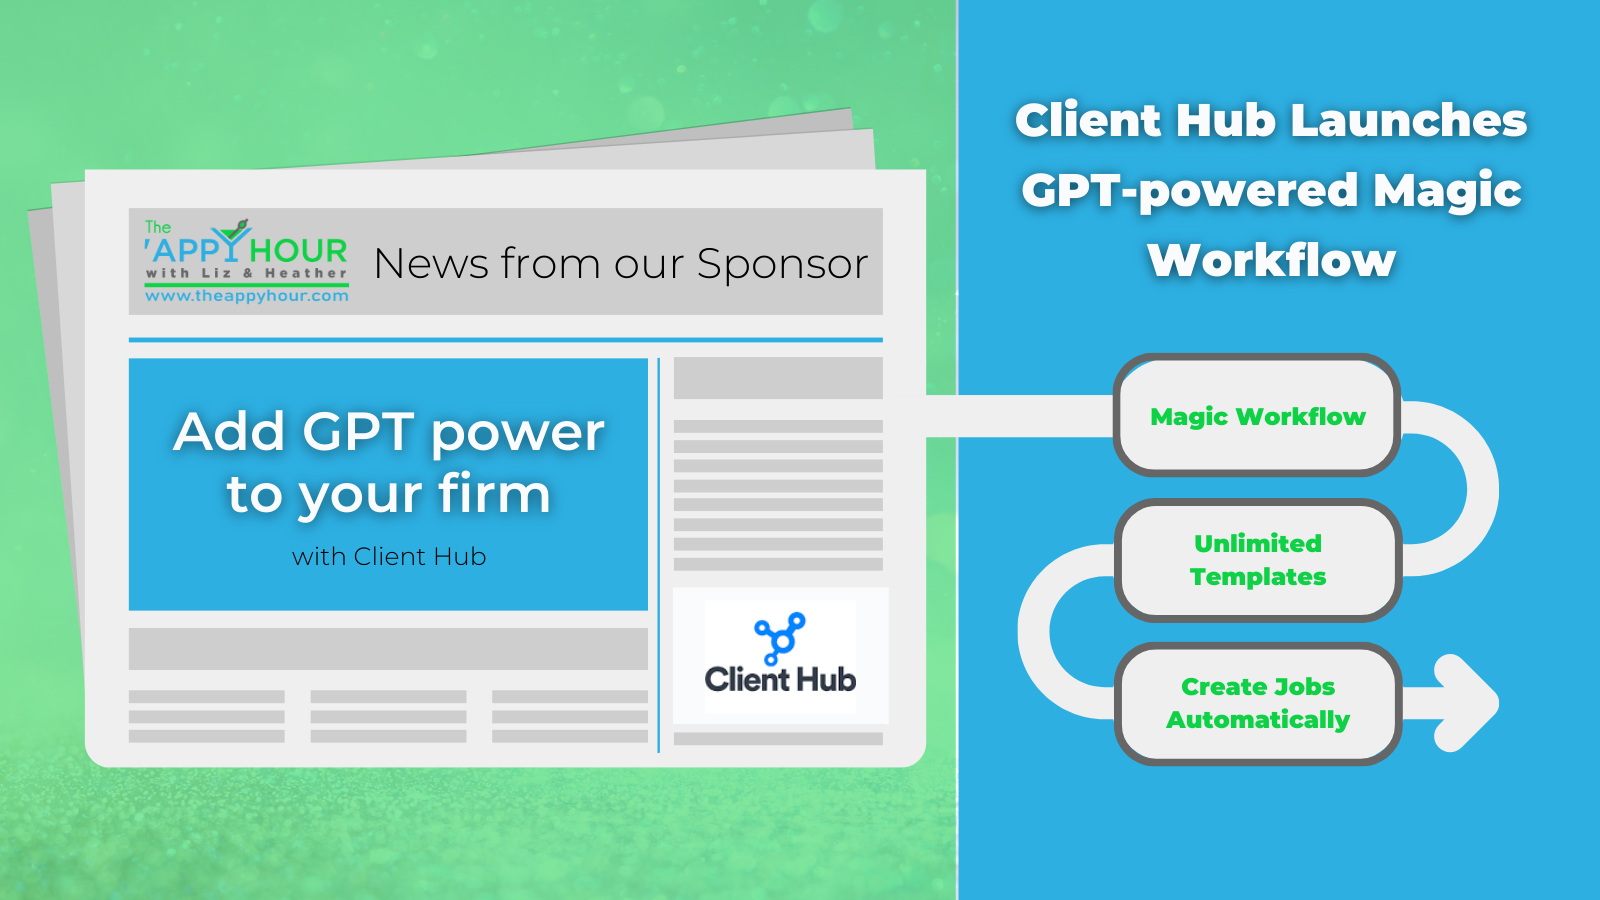 Client Hub Launches GPT-powered Magic Workflow